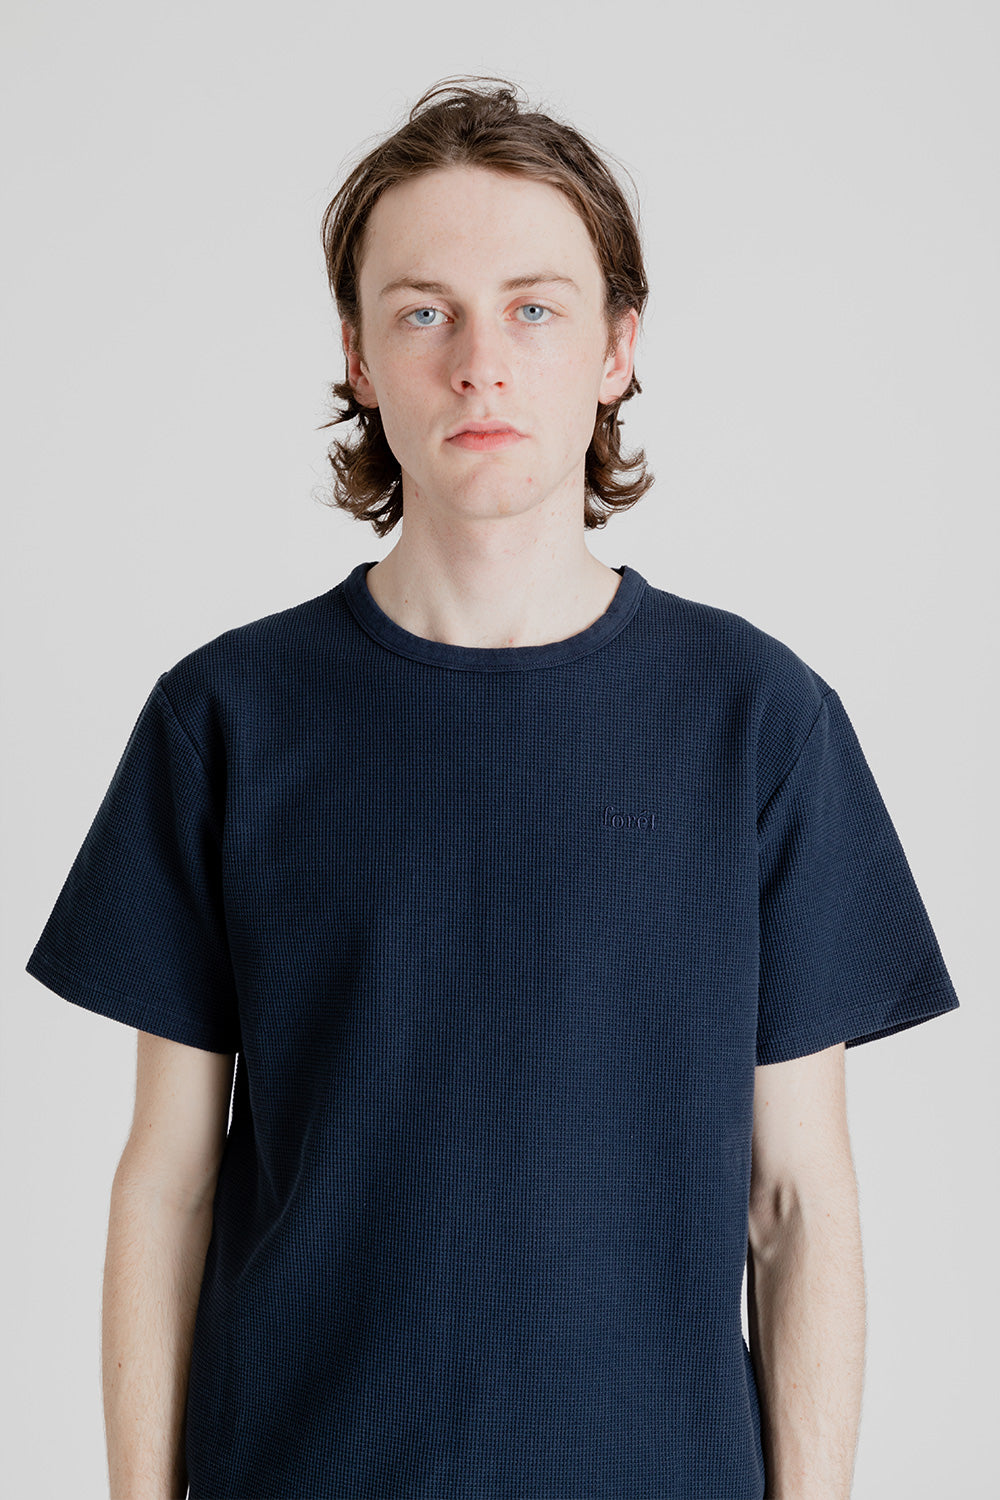 foret-park-tee-navy